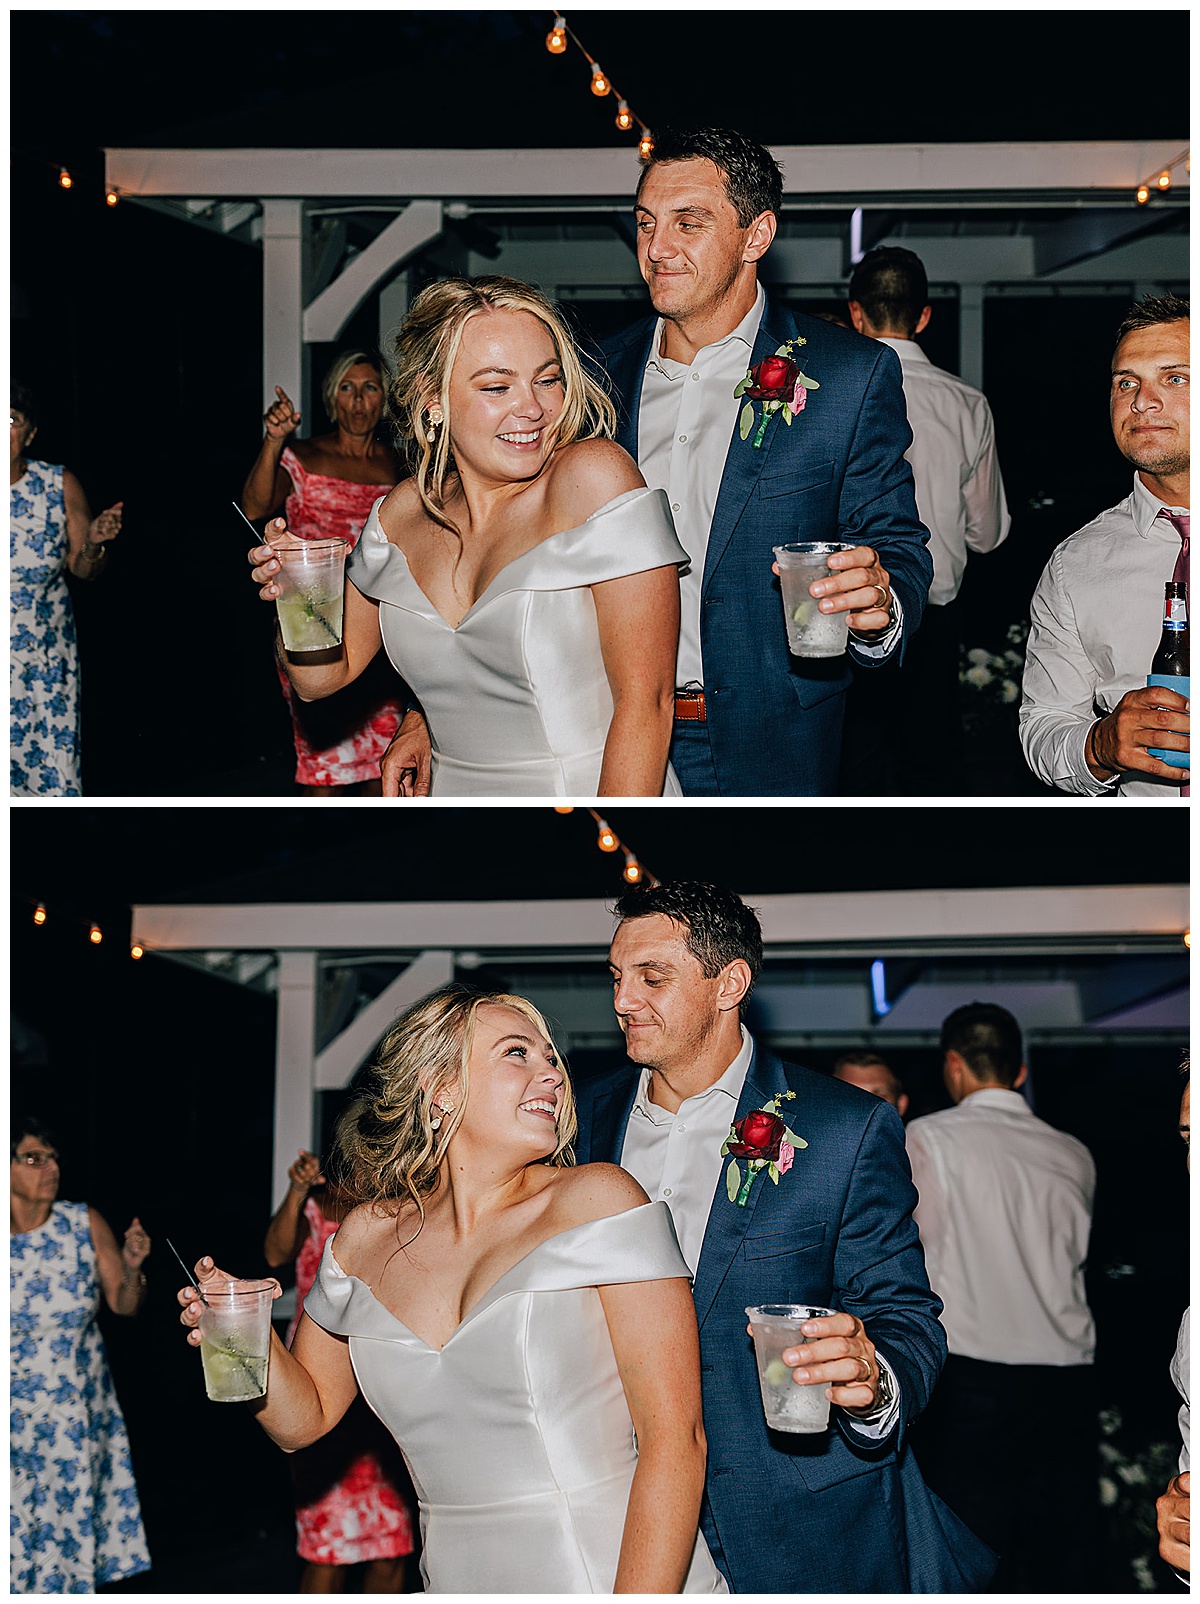 Bride and groom share a drink and dance at Toledo country club.